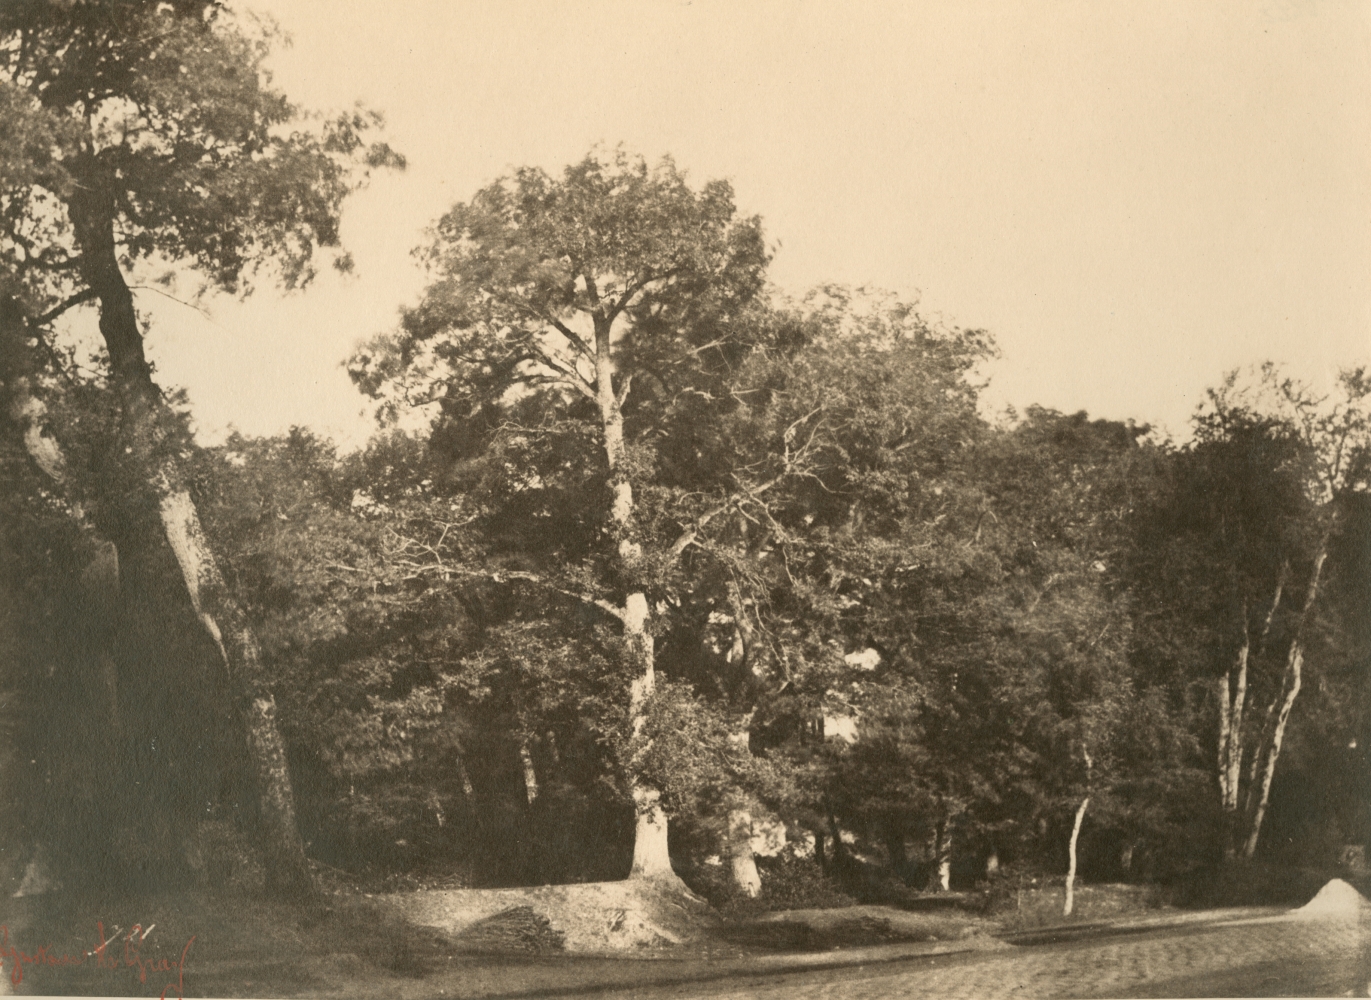 Gustave LE GRAY (French, 1820-1884) "Le Hêtre, Fontainebleau"*, early 1850s Albumen or coated salt print from a waxed paper negative 20.0 x 27.2 cm mounted on 41.7 x 56.8 cm paper Numbered "721" in the negative. Photographer's red signature stamp. Titled with "No 721" in pencil, and "721" in ink, with photographer's oval blindstamp on the mount.